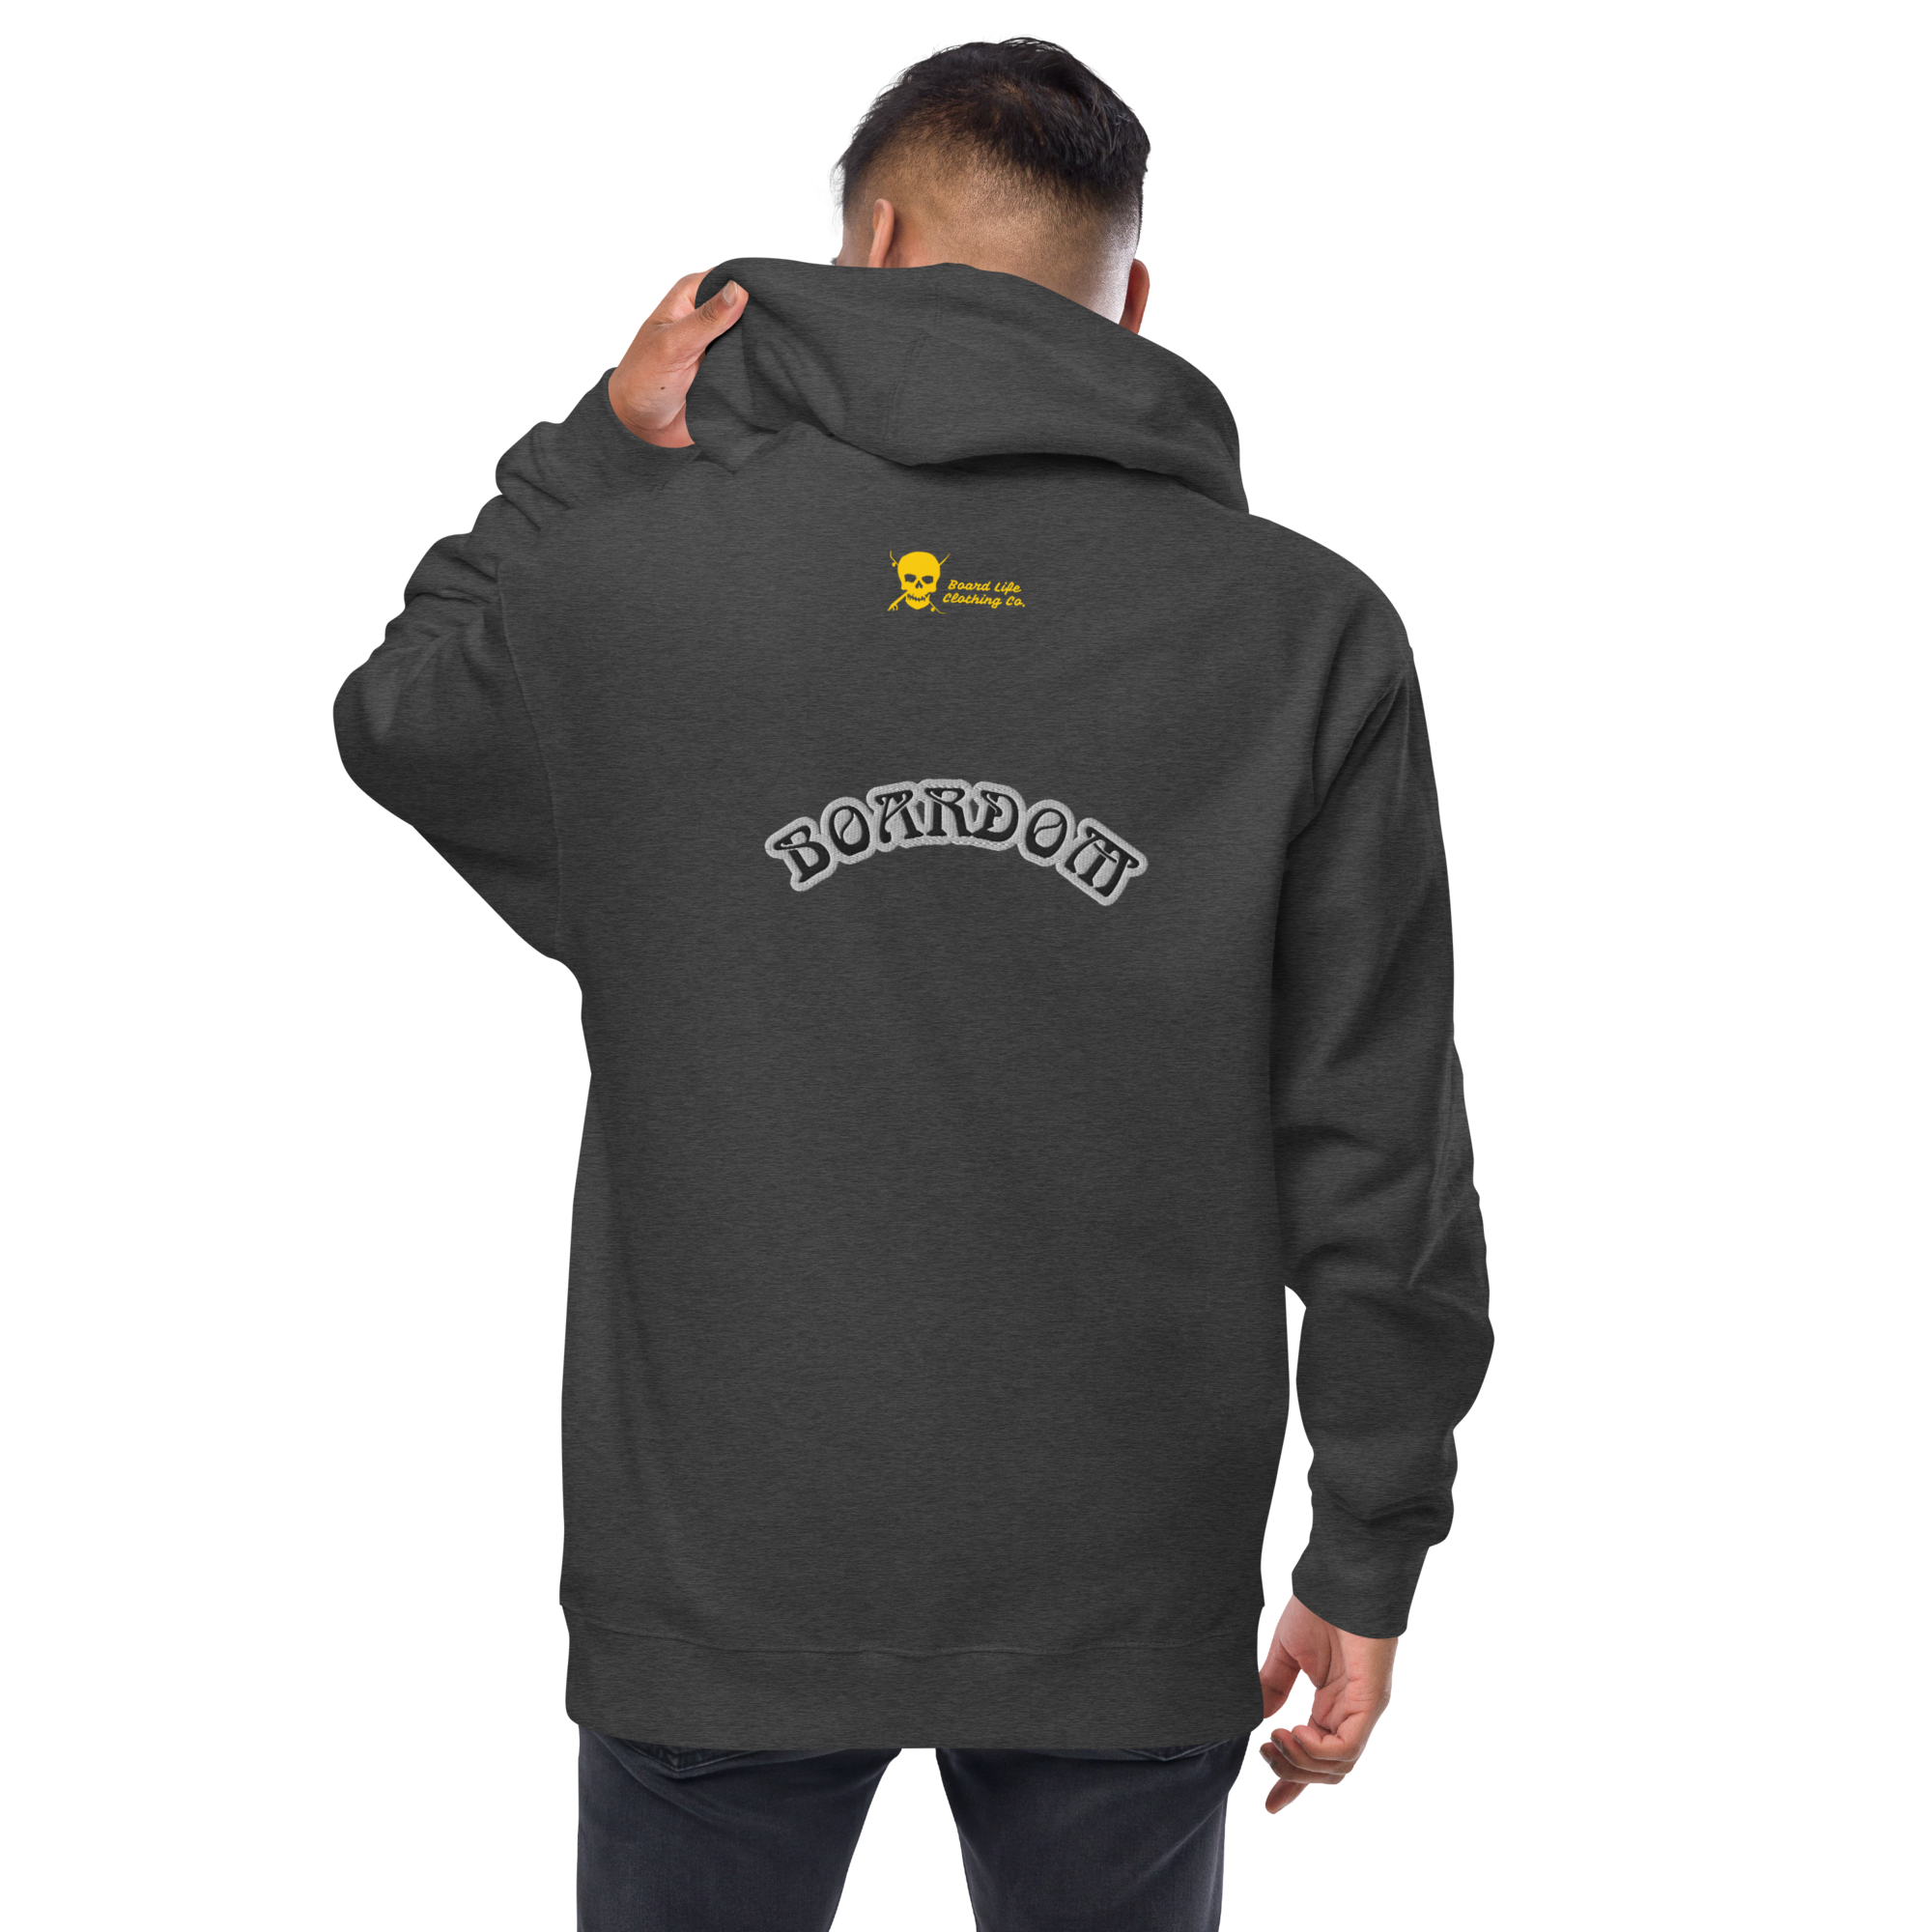 Boardom Embroidered zip up hoodie